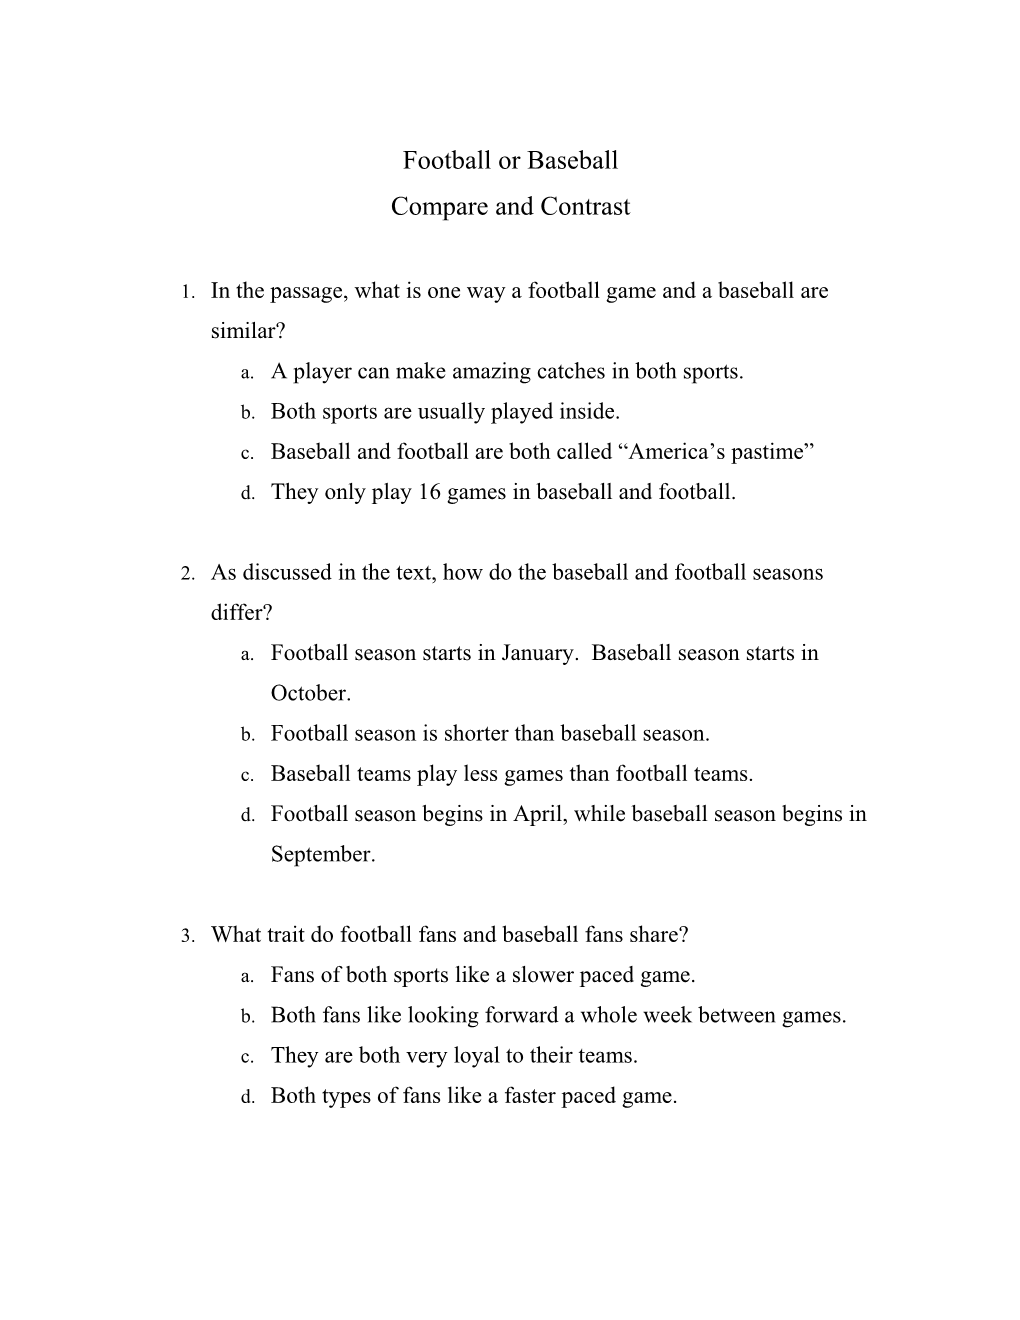 1. in the Passage, What Is One Way a Football Game and a Baseball Are Similar?